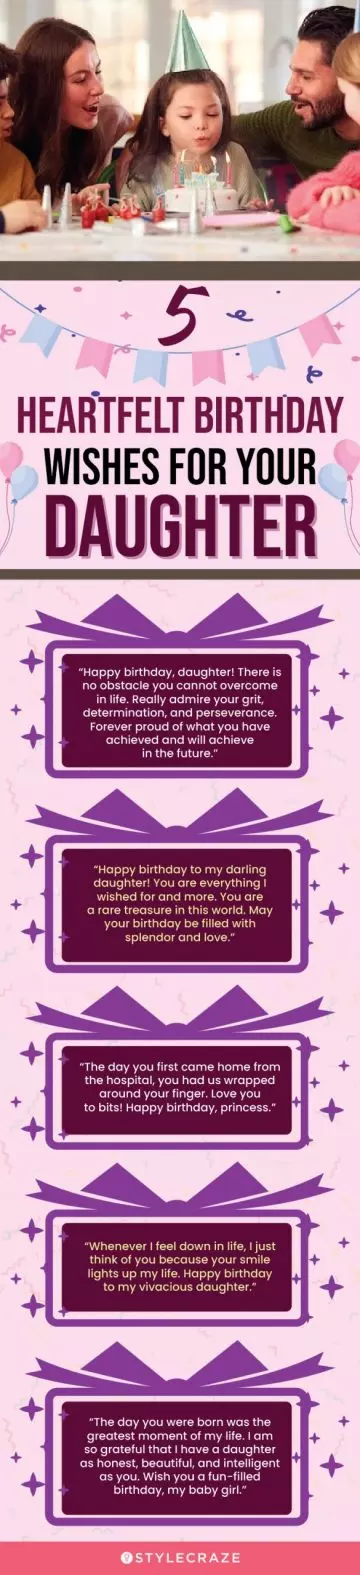 5 heartfelt birthday wishes for your daughter (infographic)